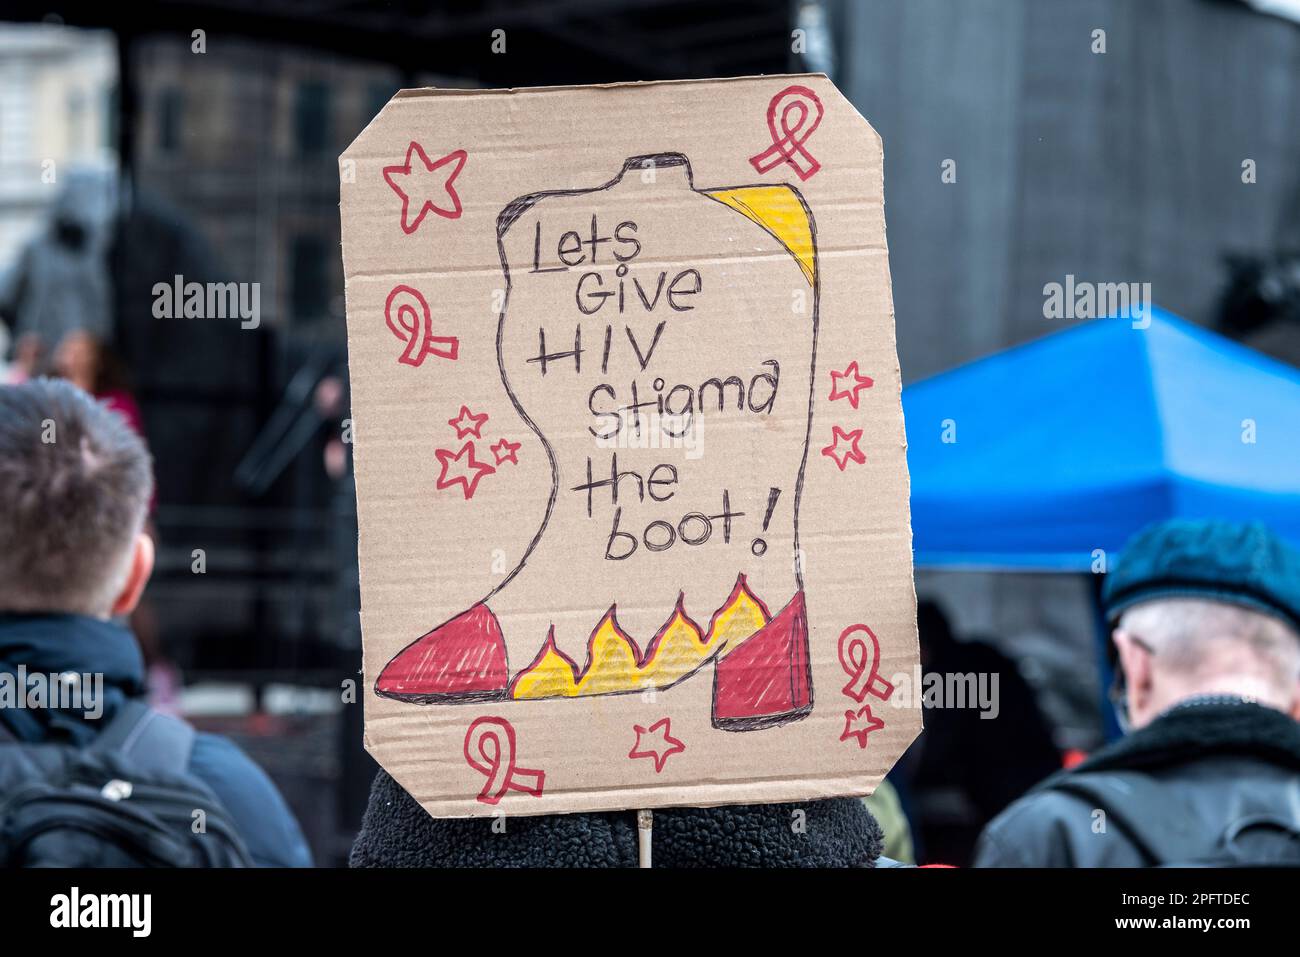 Let's give HIV stigma the boot, placard at a protest to raise awareness of negative attitudes Stock Photo